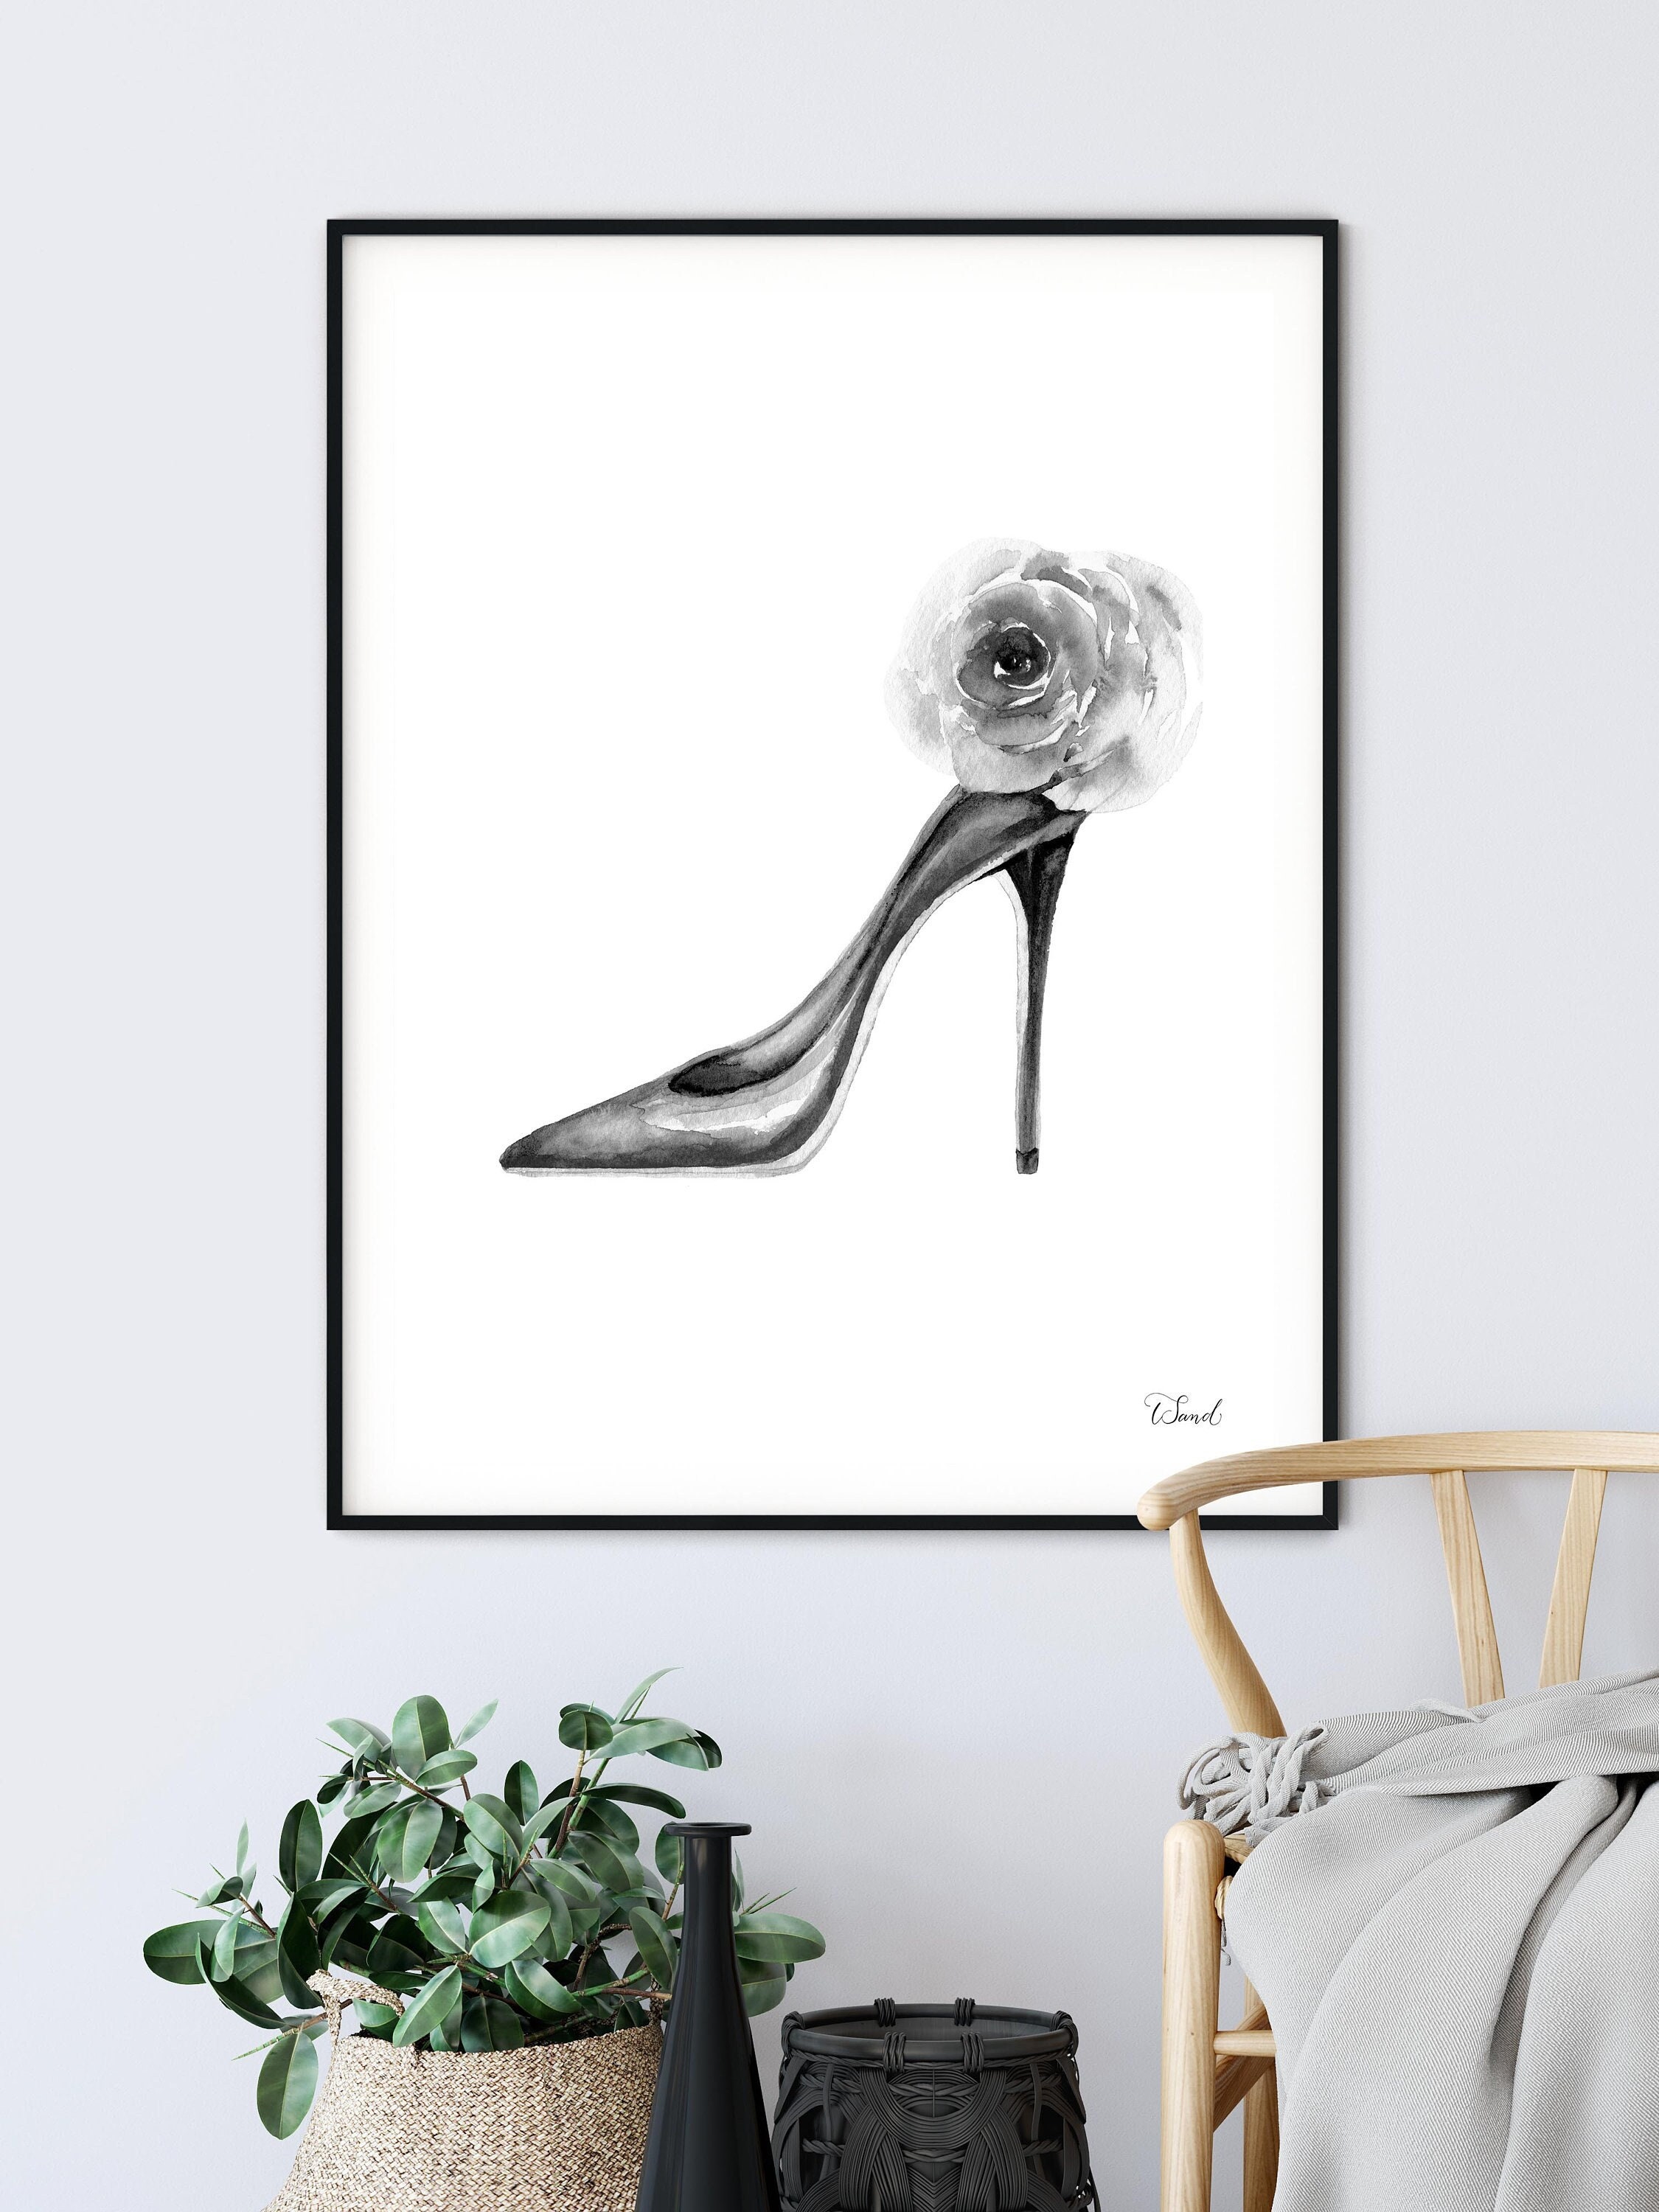  Gold Brown Fashion Wall Art Handbag High Heels Fashion  Illustration Art Print Of Watercolor Painting-Matte Paper Print & Stretched  Canvas Print : Handmade Products